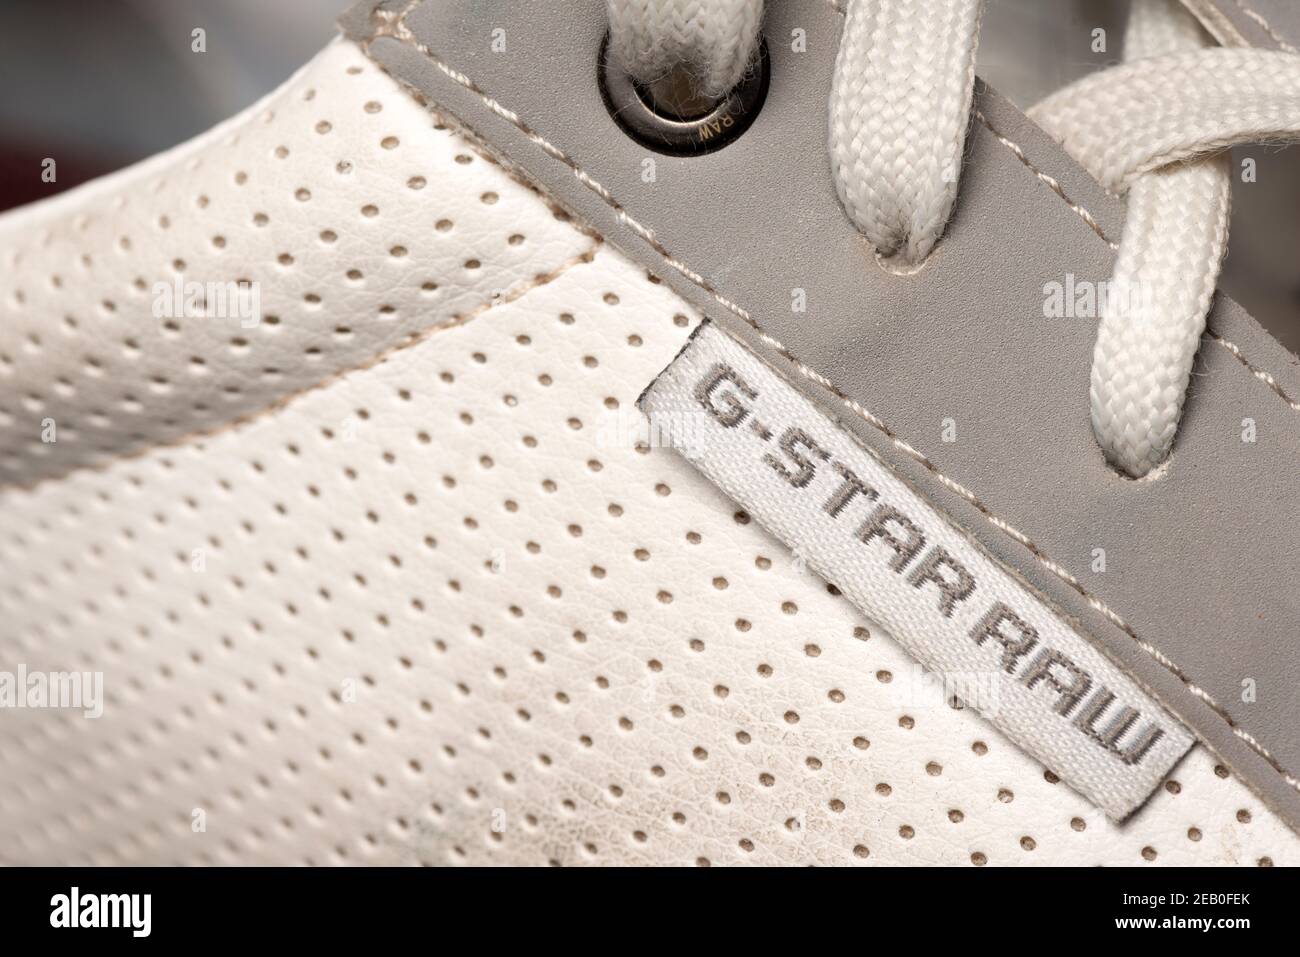 G-Star fabric clothing label on white men's shoes close up detail Stock - Alamy